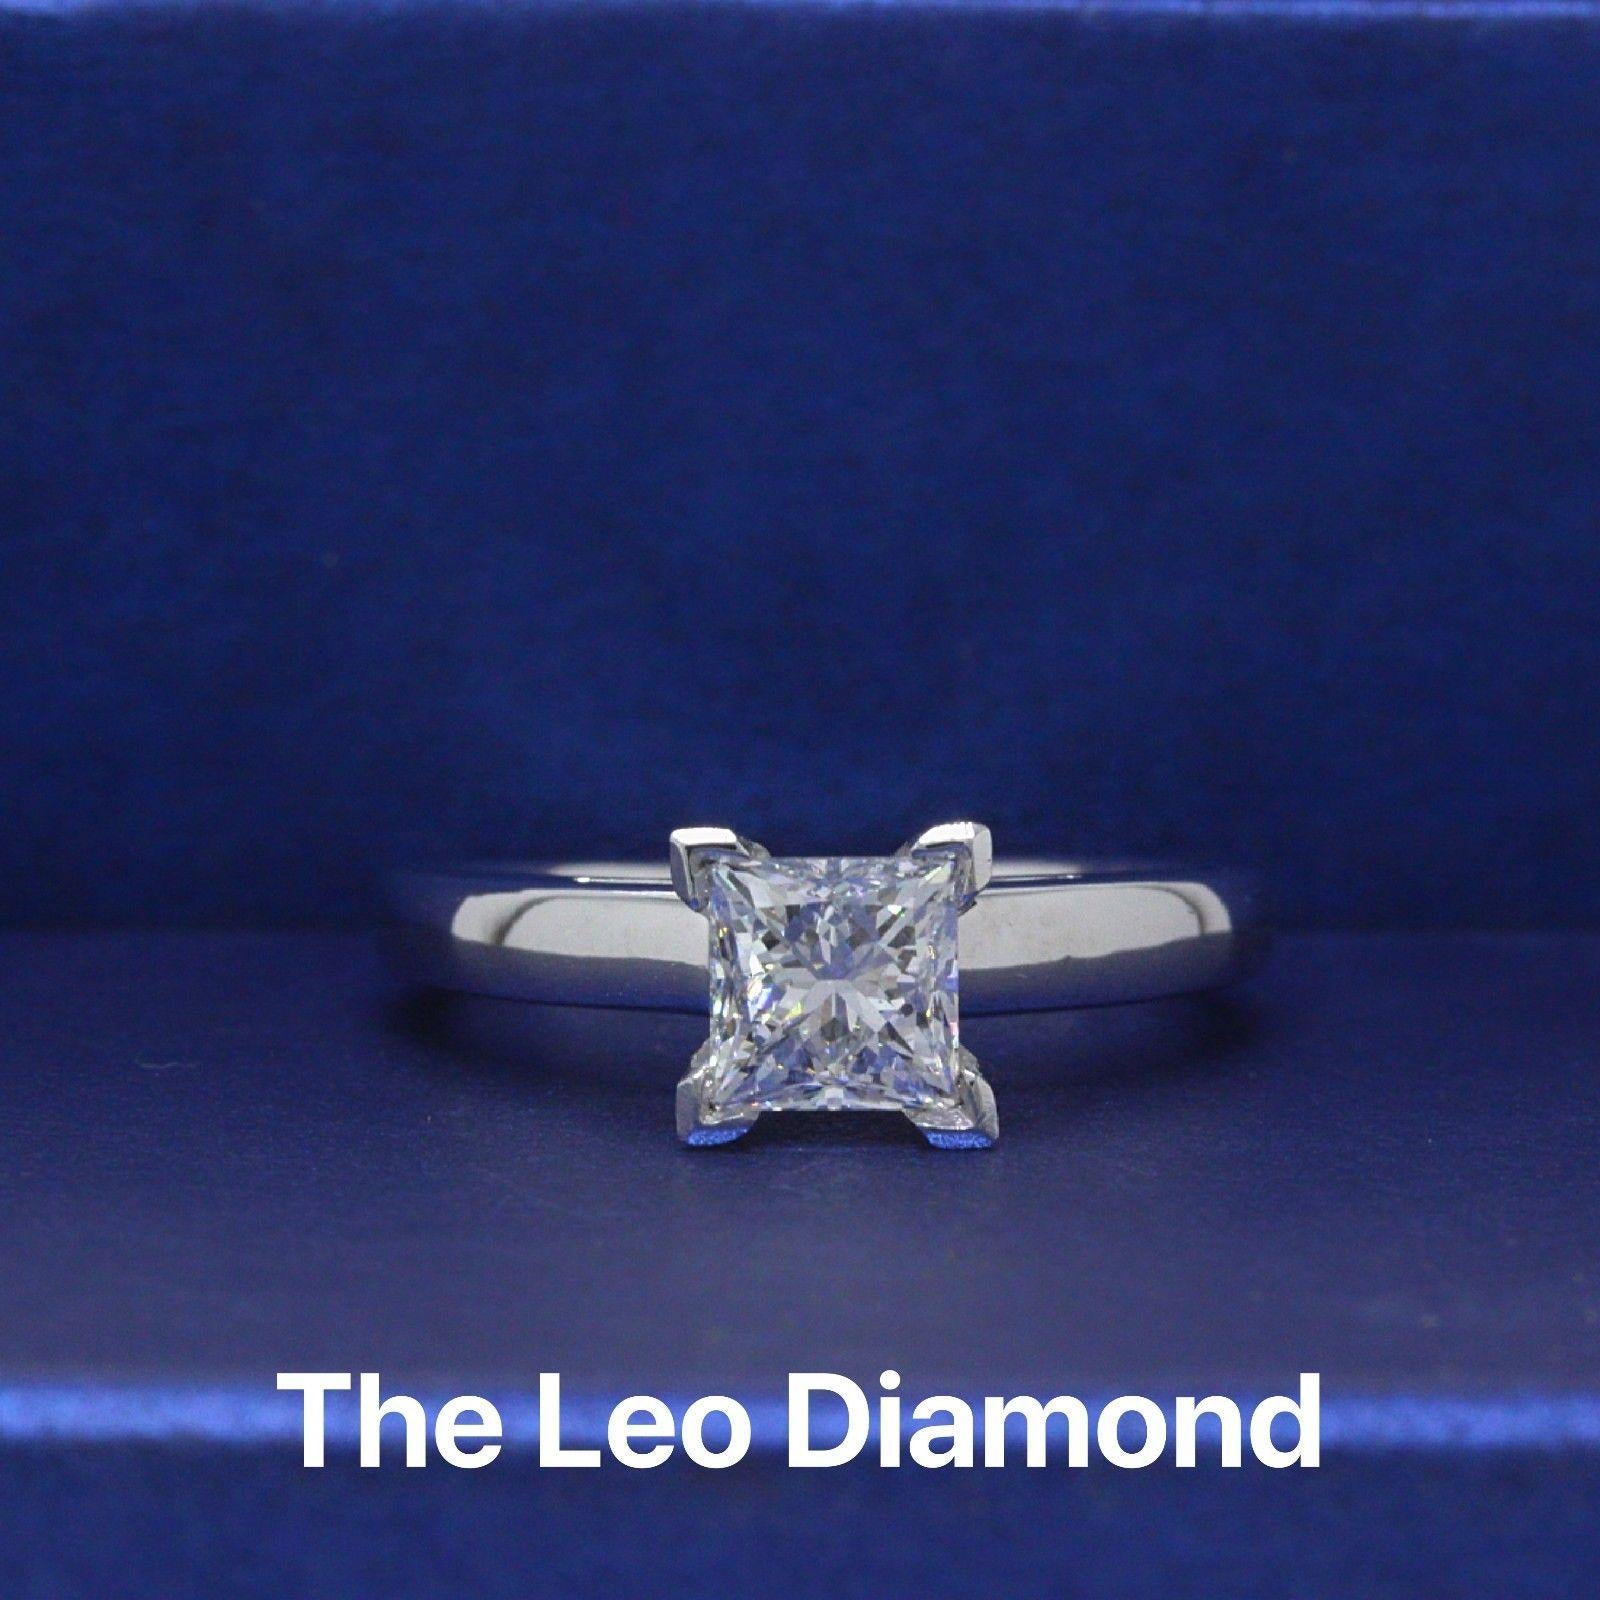 THE LEO DIAMOND
Style: Solitaire
Serial Number: LEO 139538S
Metal: 14KT White Gold & Platinum Prongs
Size:  5.75 (sizable)
Total Carat Weight: 1.01 CTS
Diamond Shape: LEO Princess
Diamond Color & Clarity:  D / VS1
Comments:  -Diamond Laser Inscribed